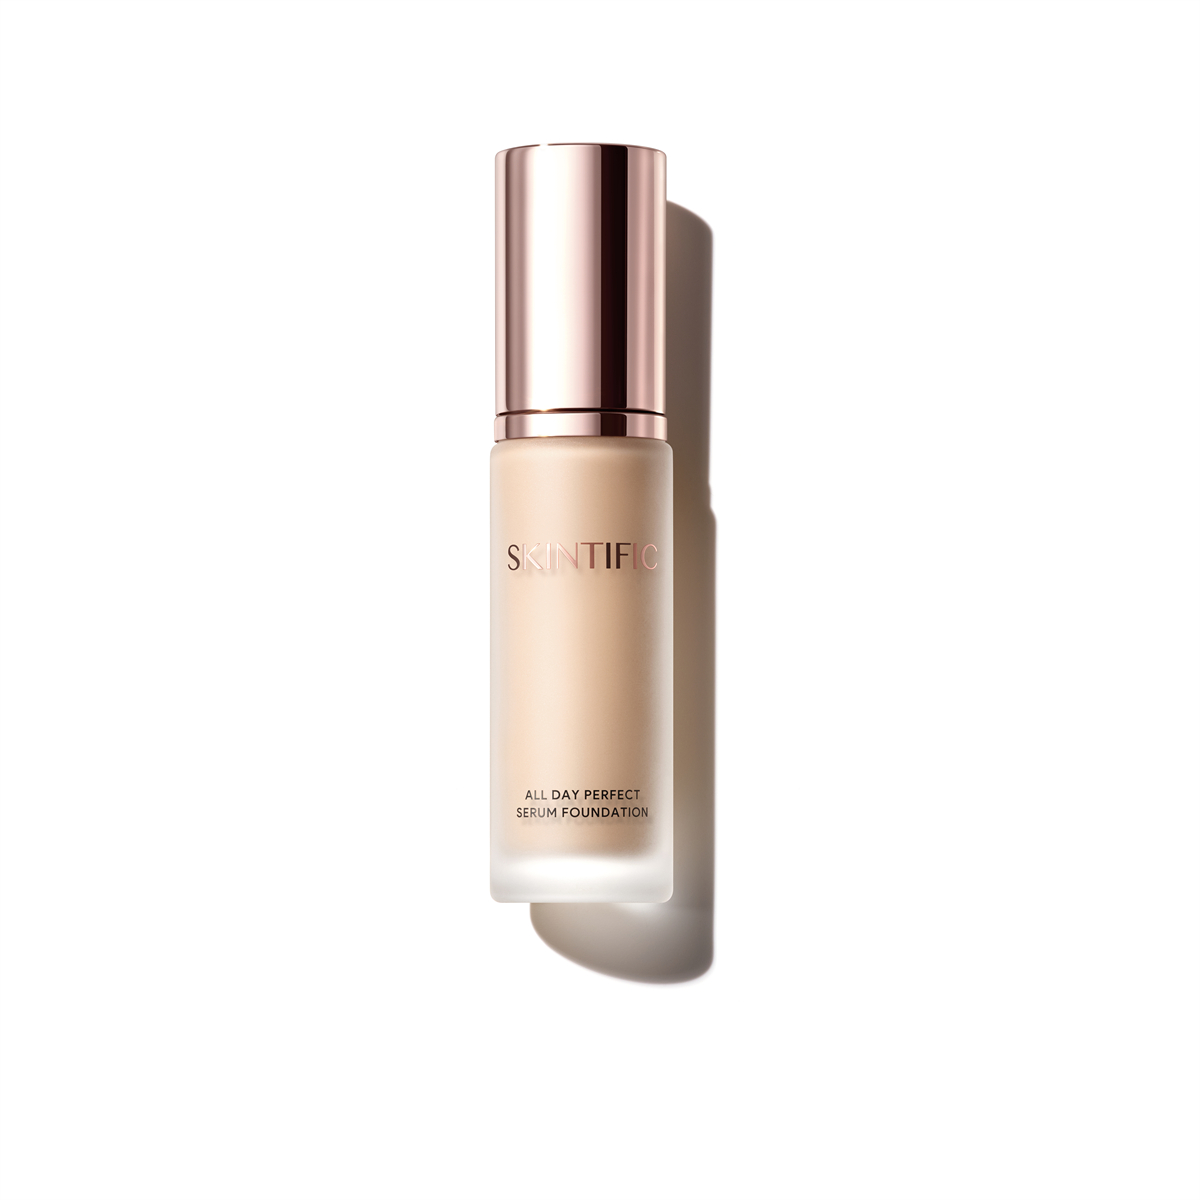 SKINTIFIC All Day Perfect Serum Foundation Full Coverage 25ml 24 Hour 